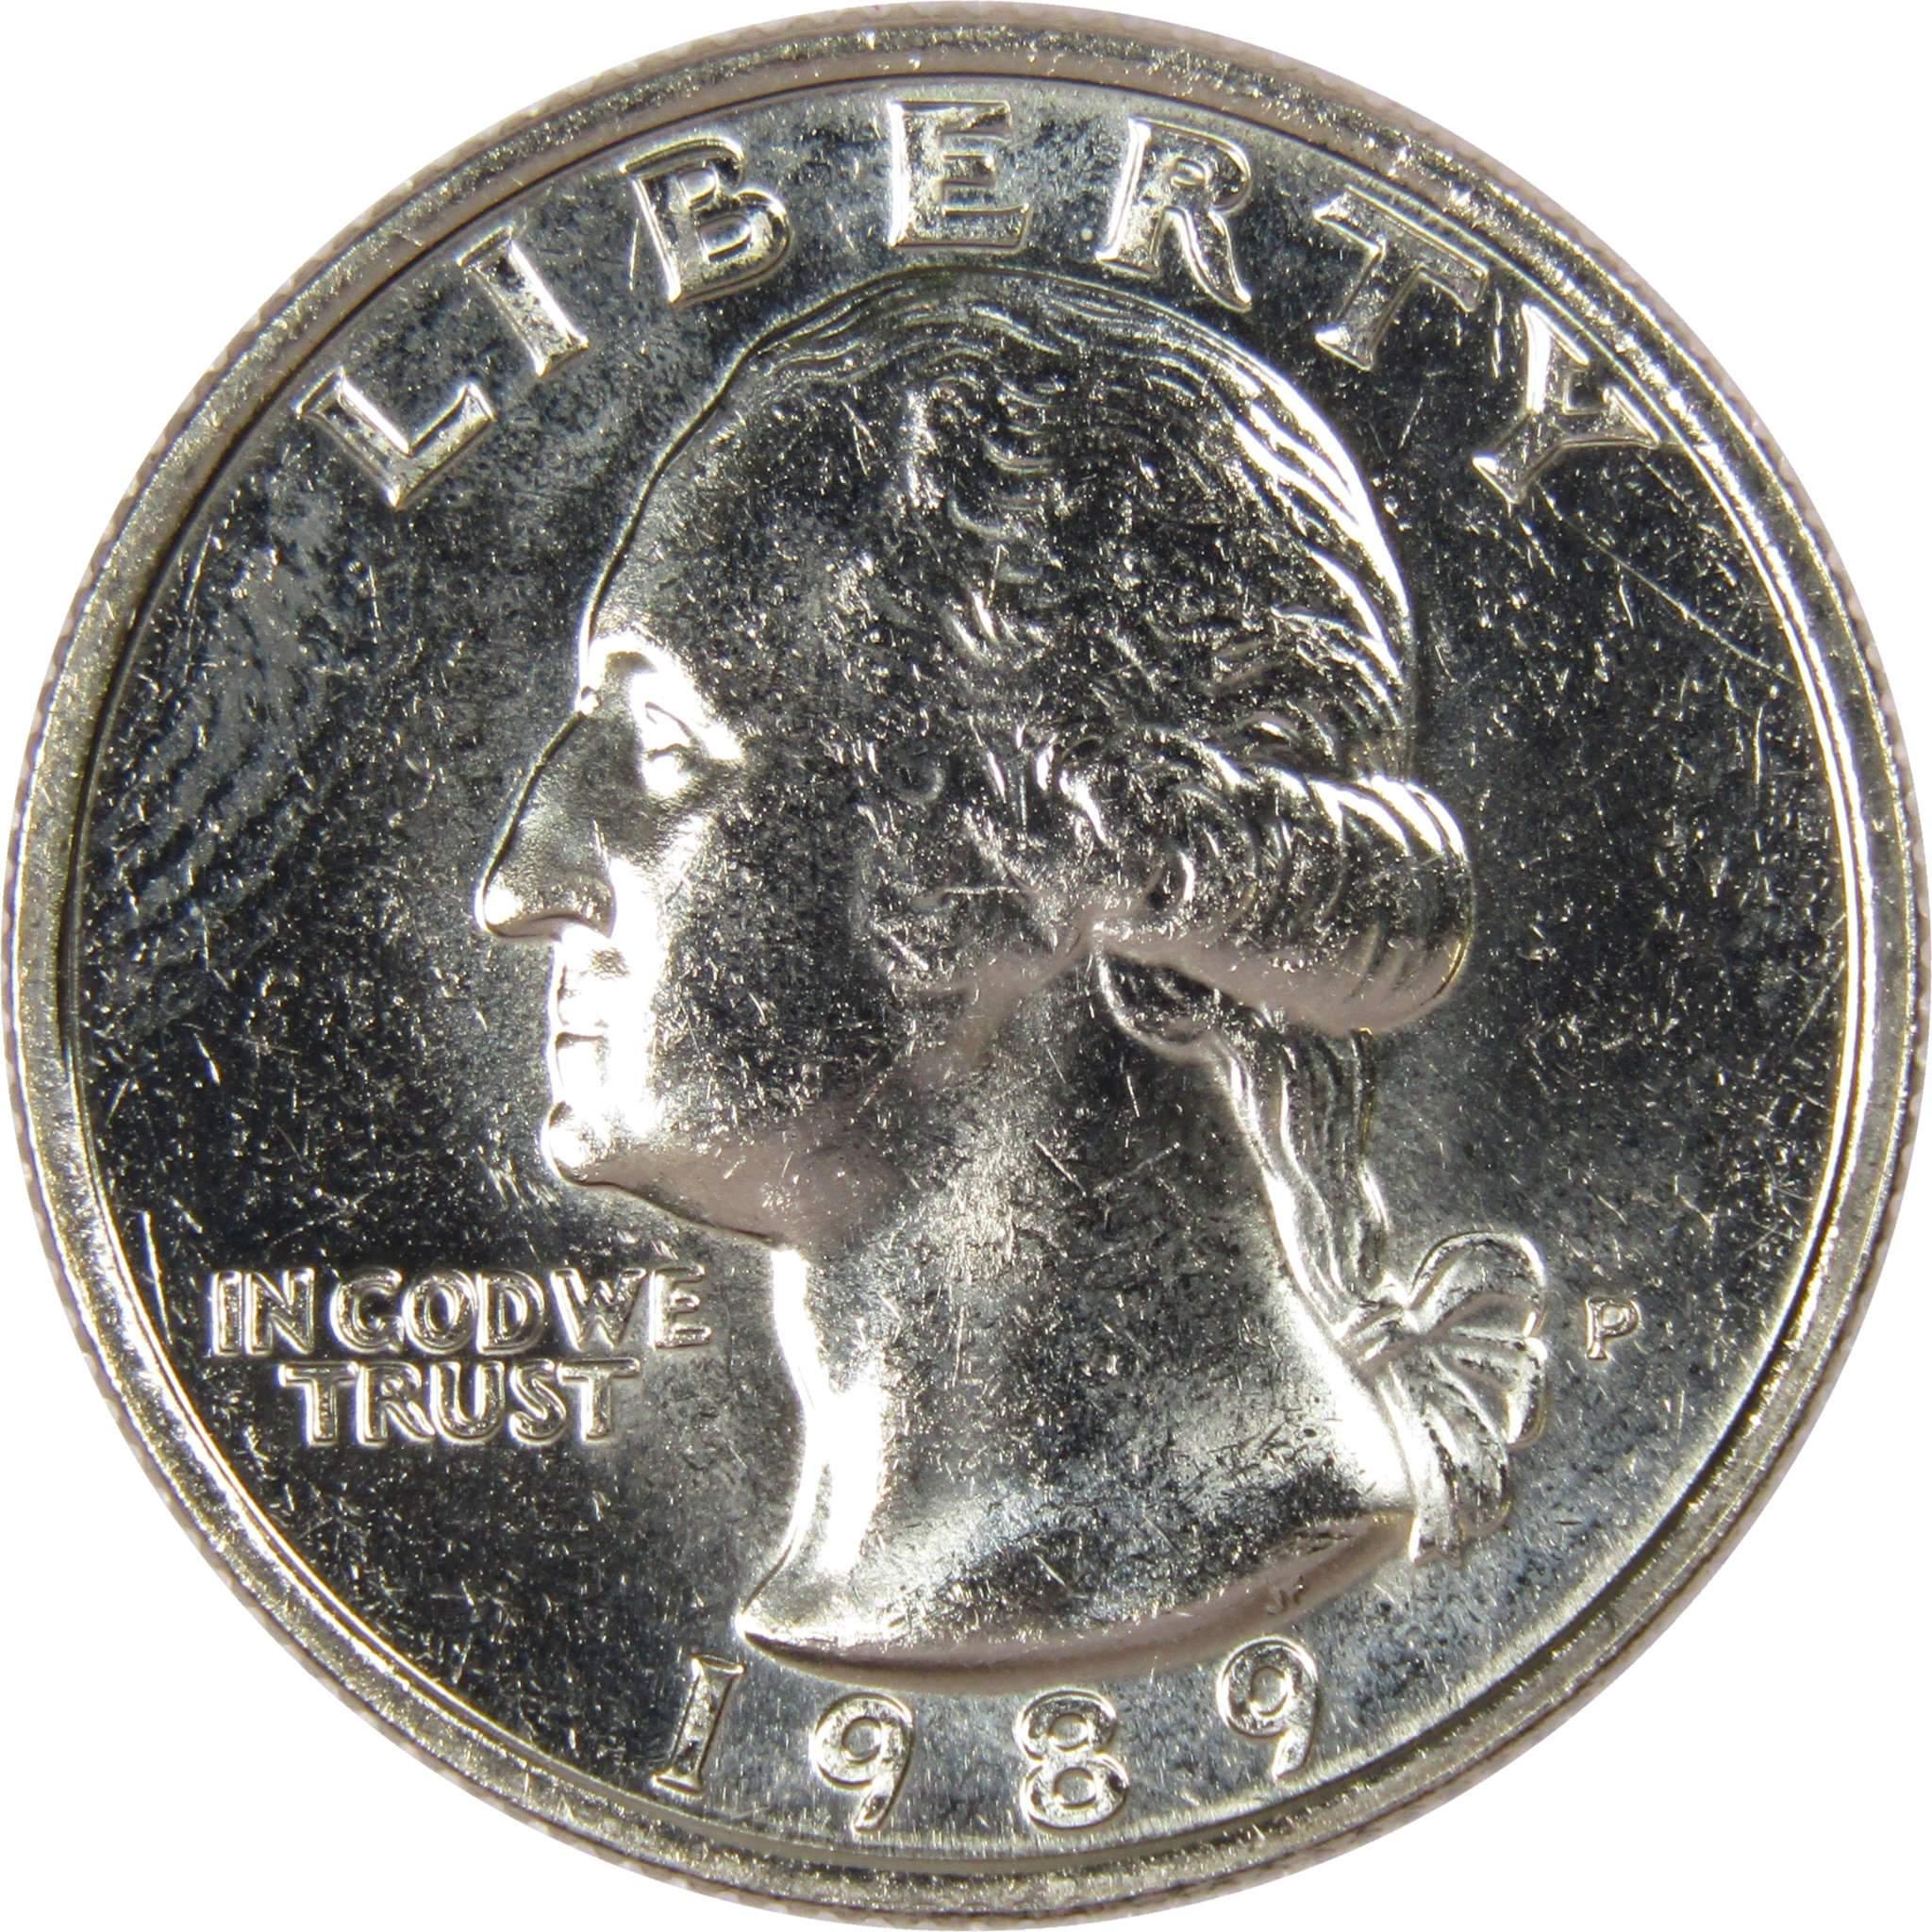 1989 P Washington Quarter BU Uncirculated Mint State 25c US Coin Collectible